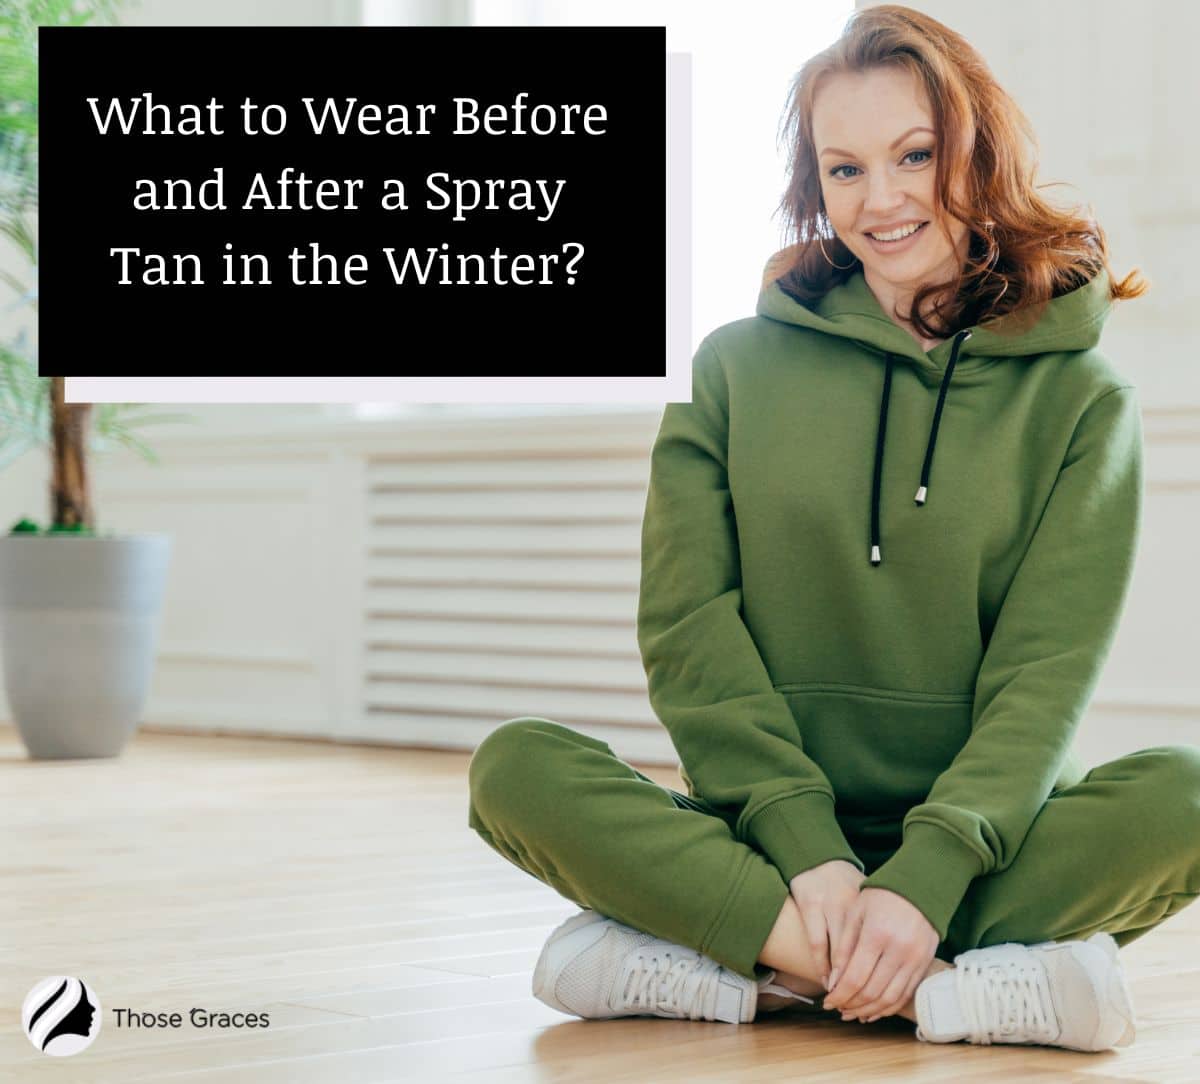 lady wearing dark green hoodie and pants for what to wear after a spray tan in winter